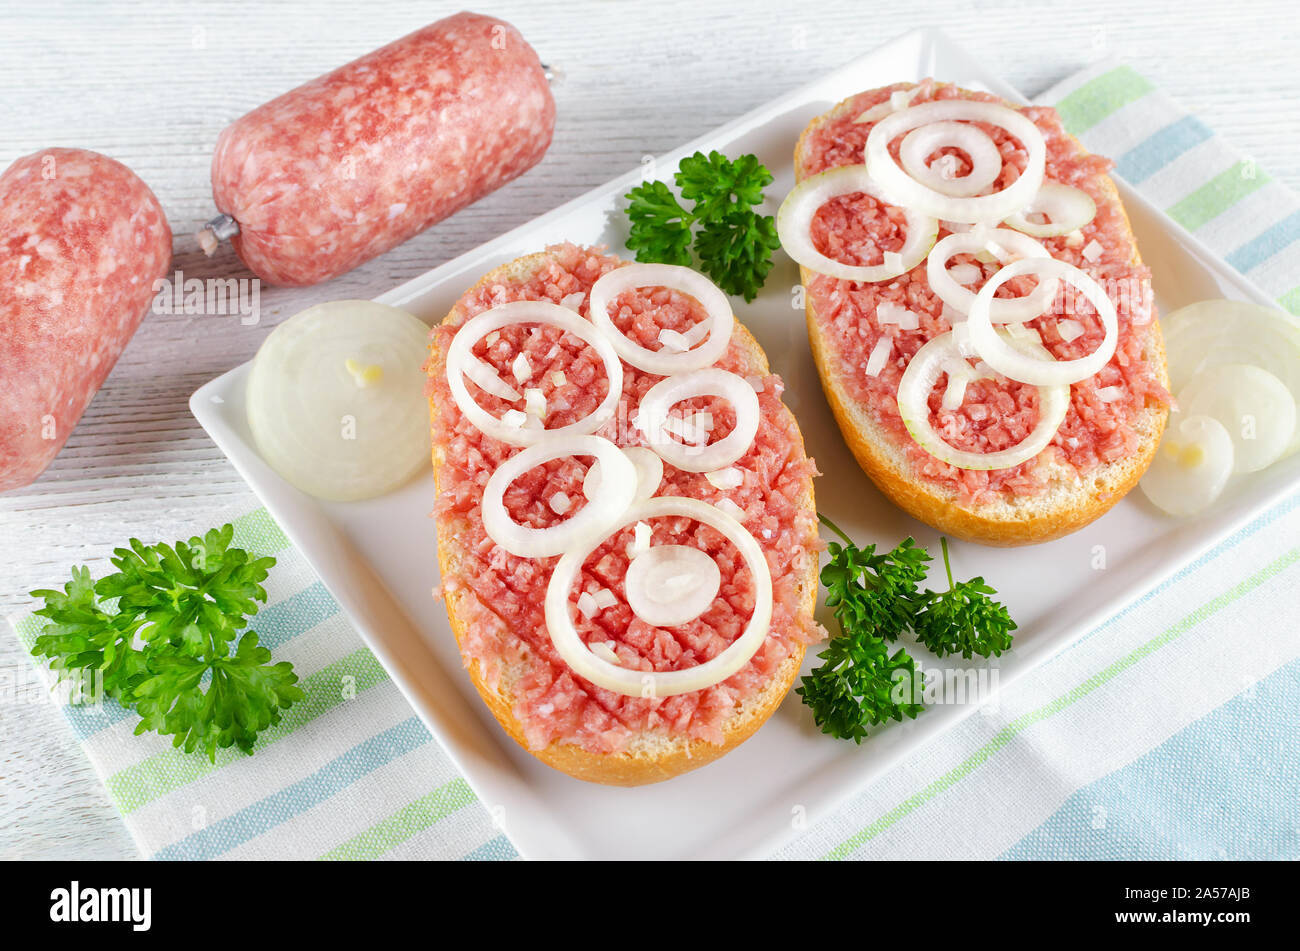 german food mett ground pork, raw meat with onion and parsley Stock Photo